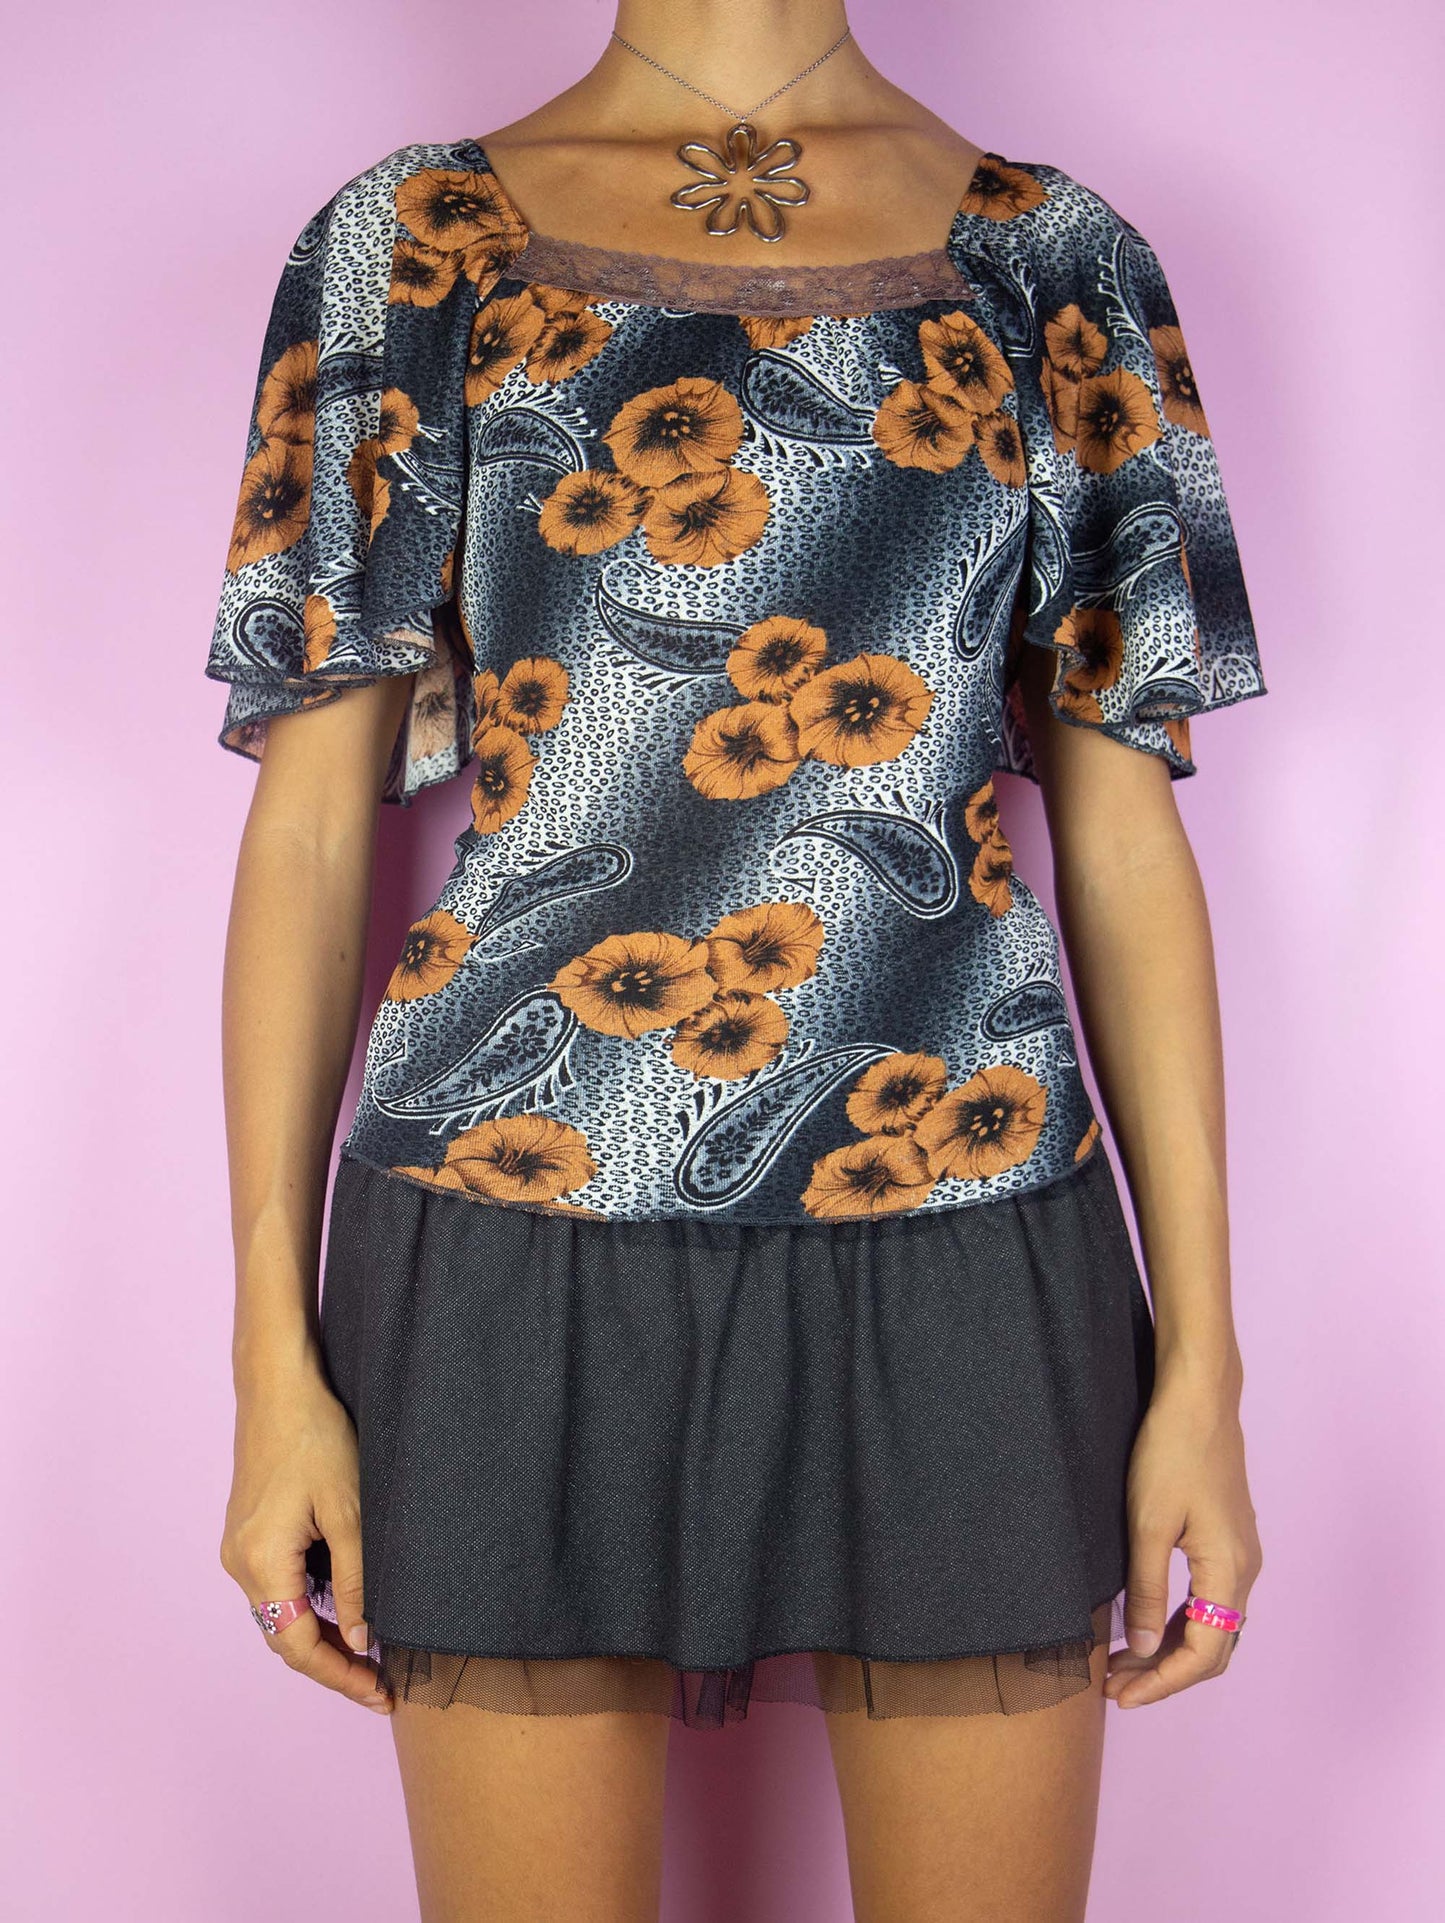 The Vintage Y2K Boho Floral Mesh Top is a gray brown and white abstract floral print mesh short sleeve t-shirt. Super cute bohemian summer blouse circa 2000's.